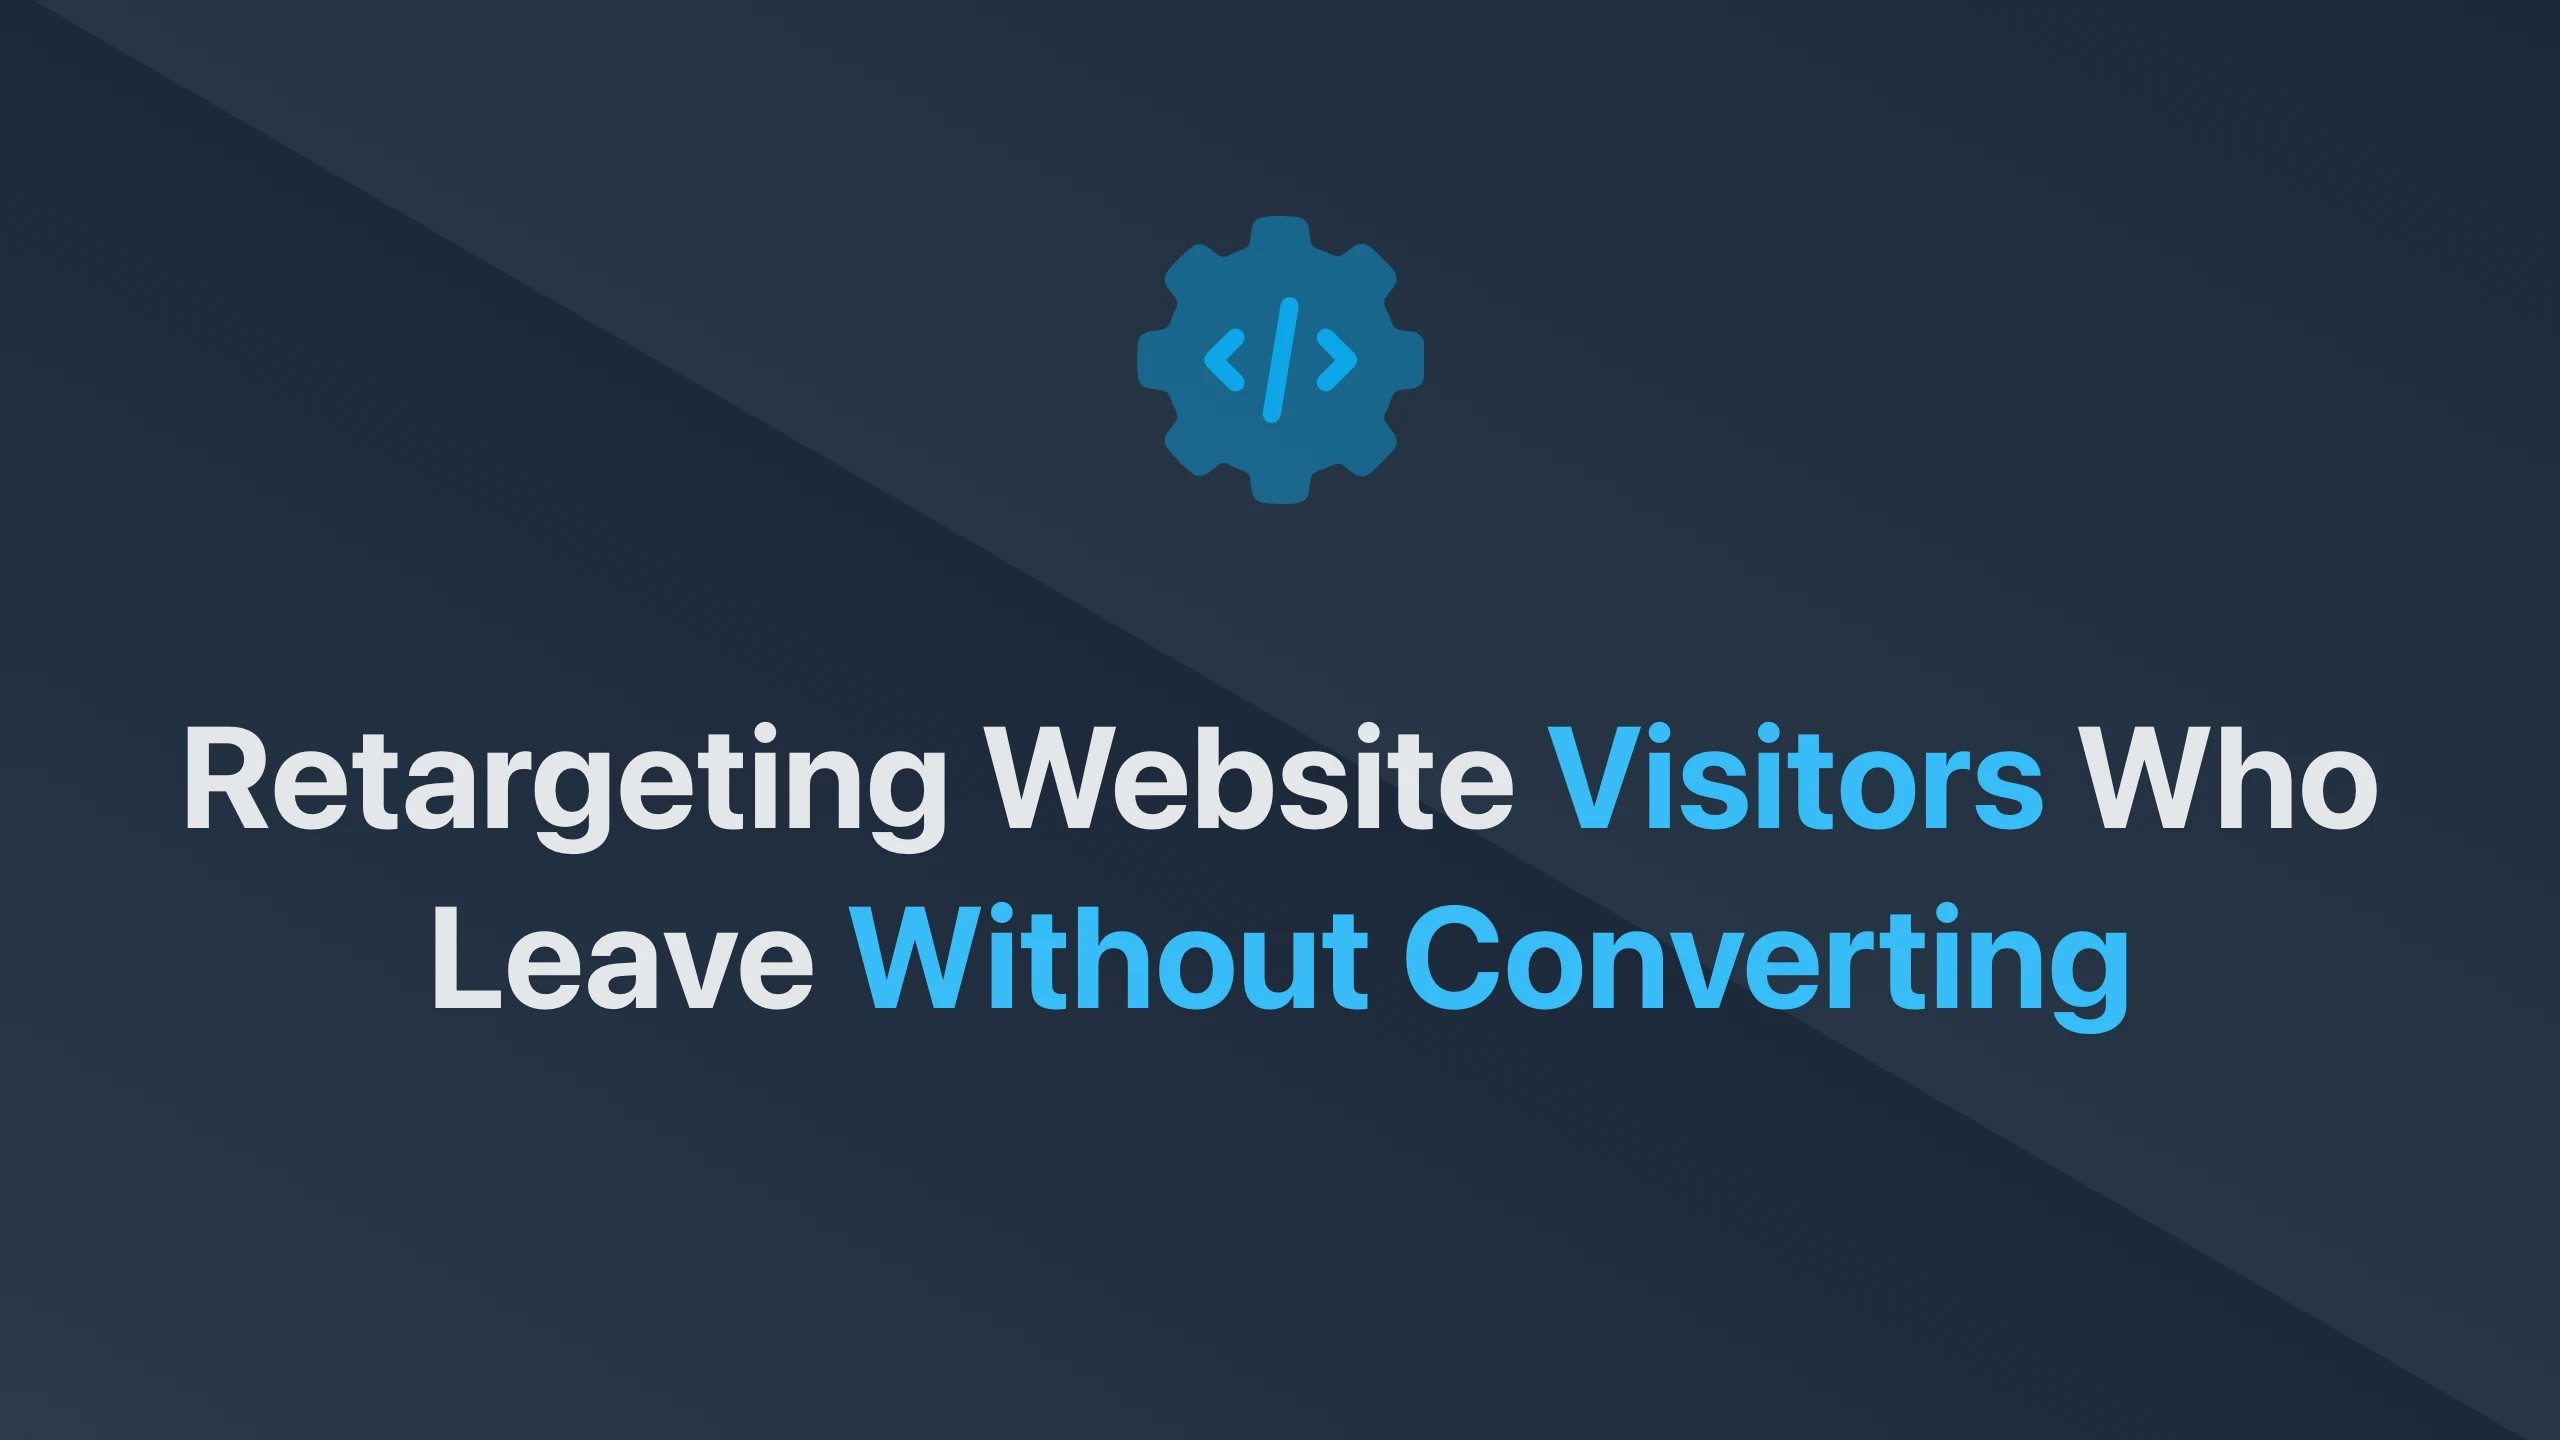 Cover Image for Retargeting Website Visitors Who Leave Without Converting